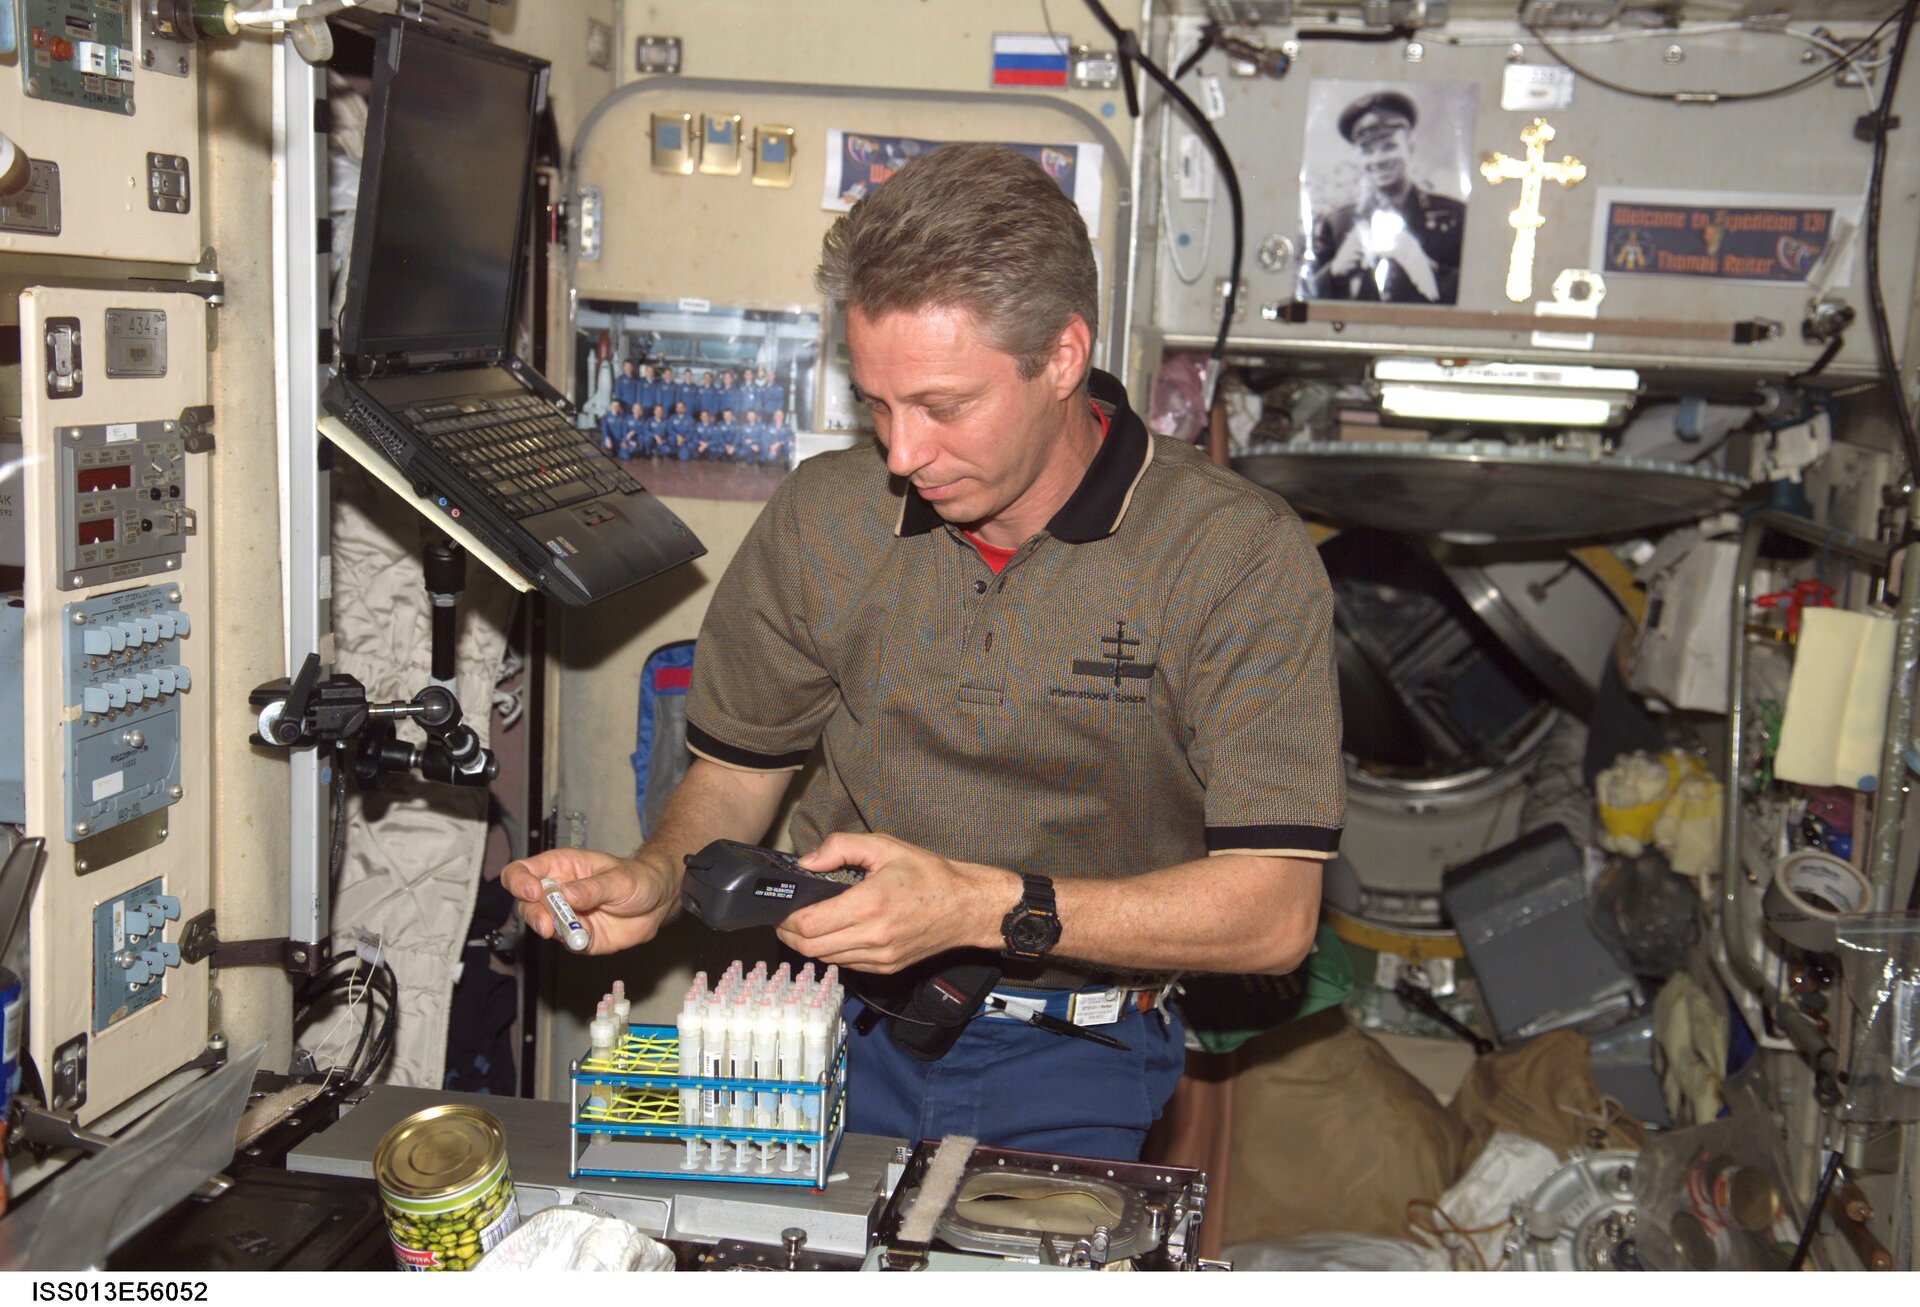 Thomas Reiter with experiment in the Zvezda module